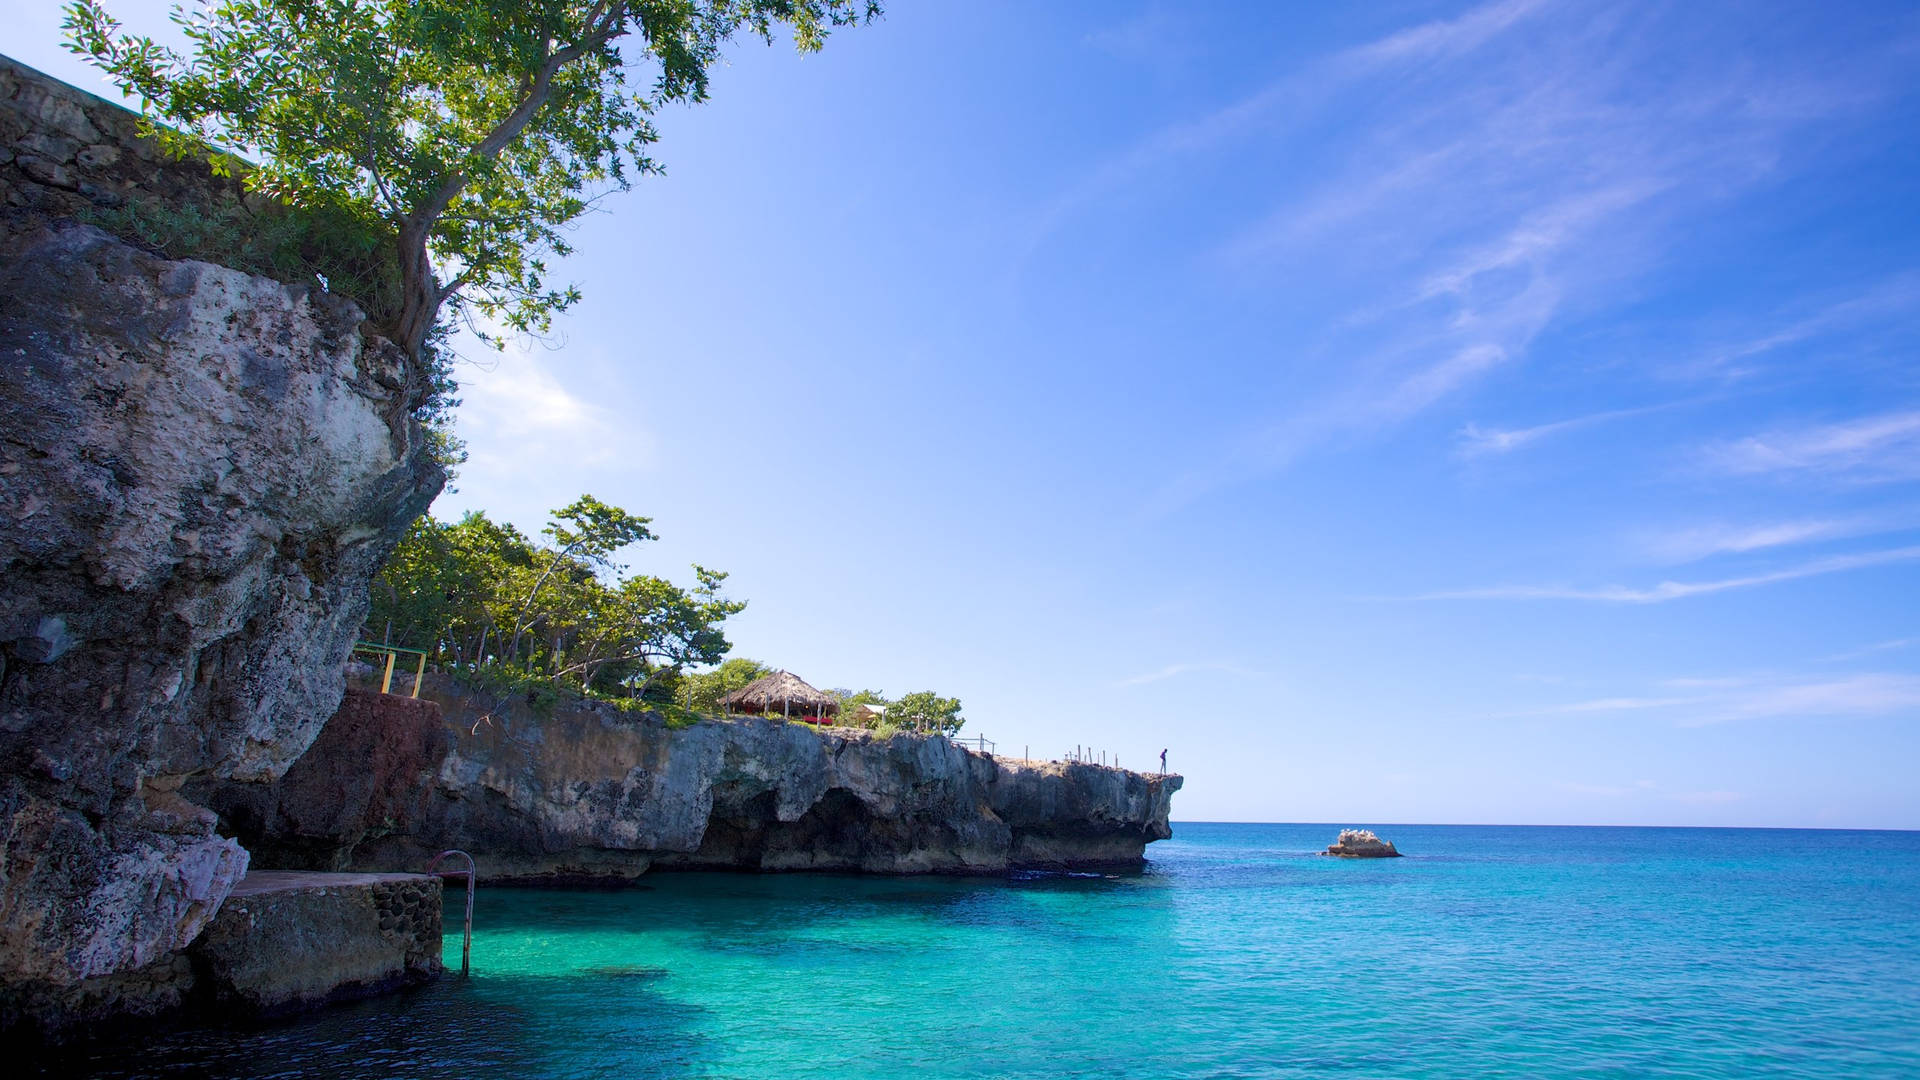 Jamaica Negril Sea View Background